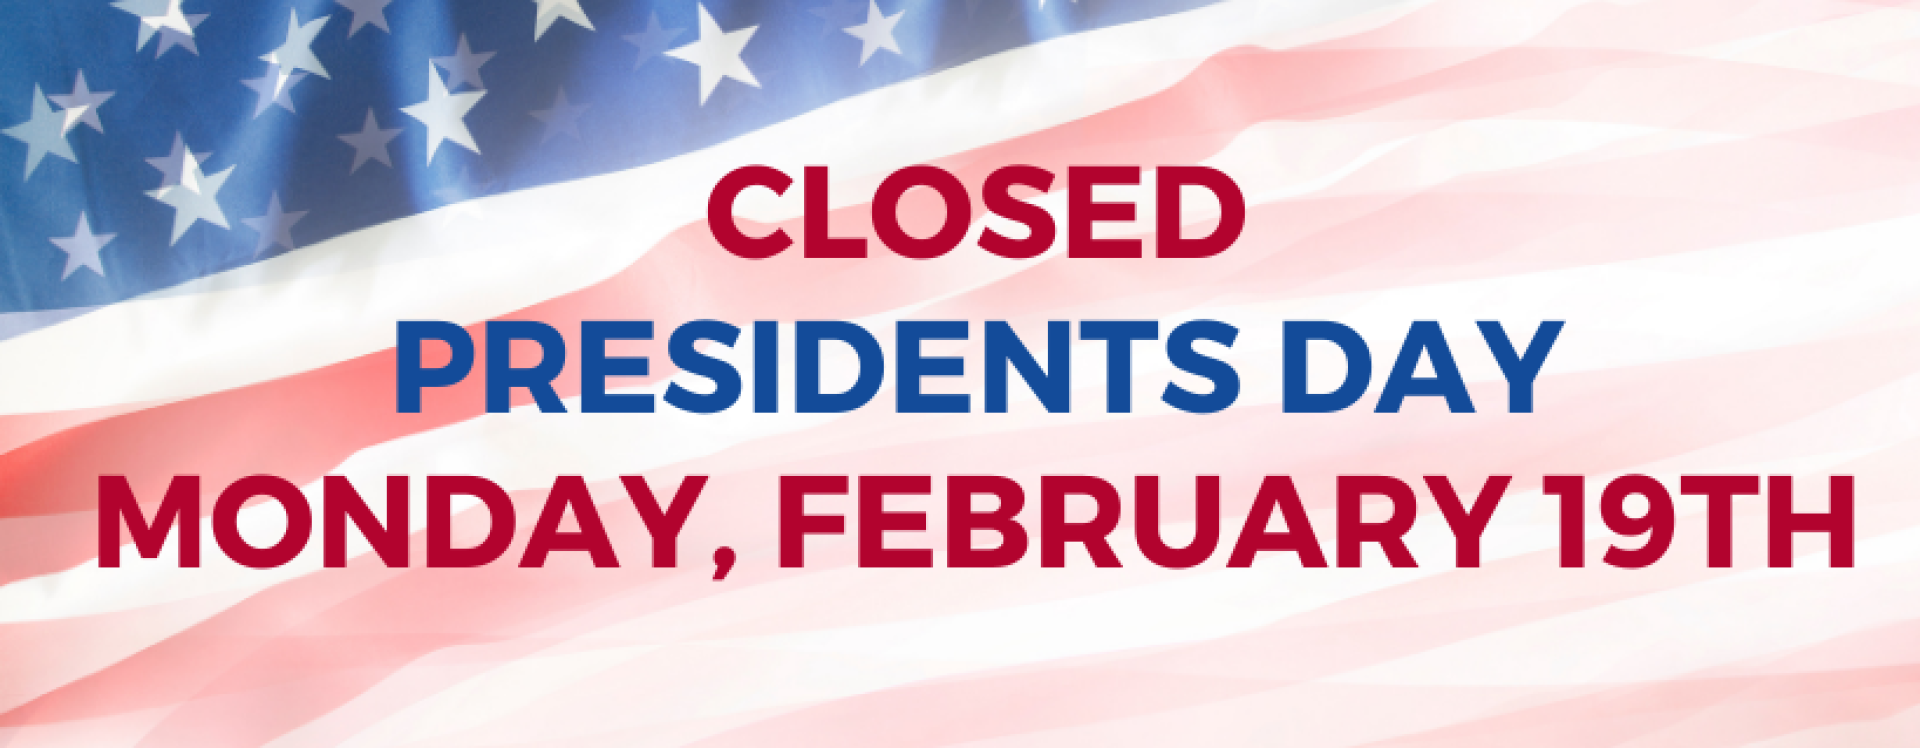 closed Monday, Feb 19th for Presidents Day